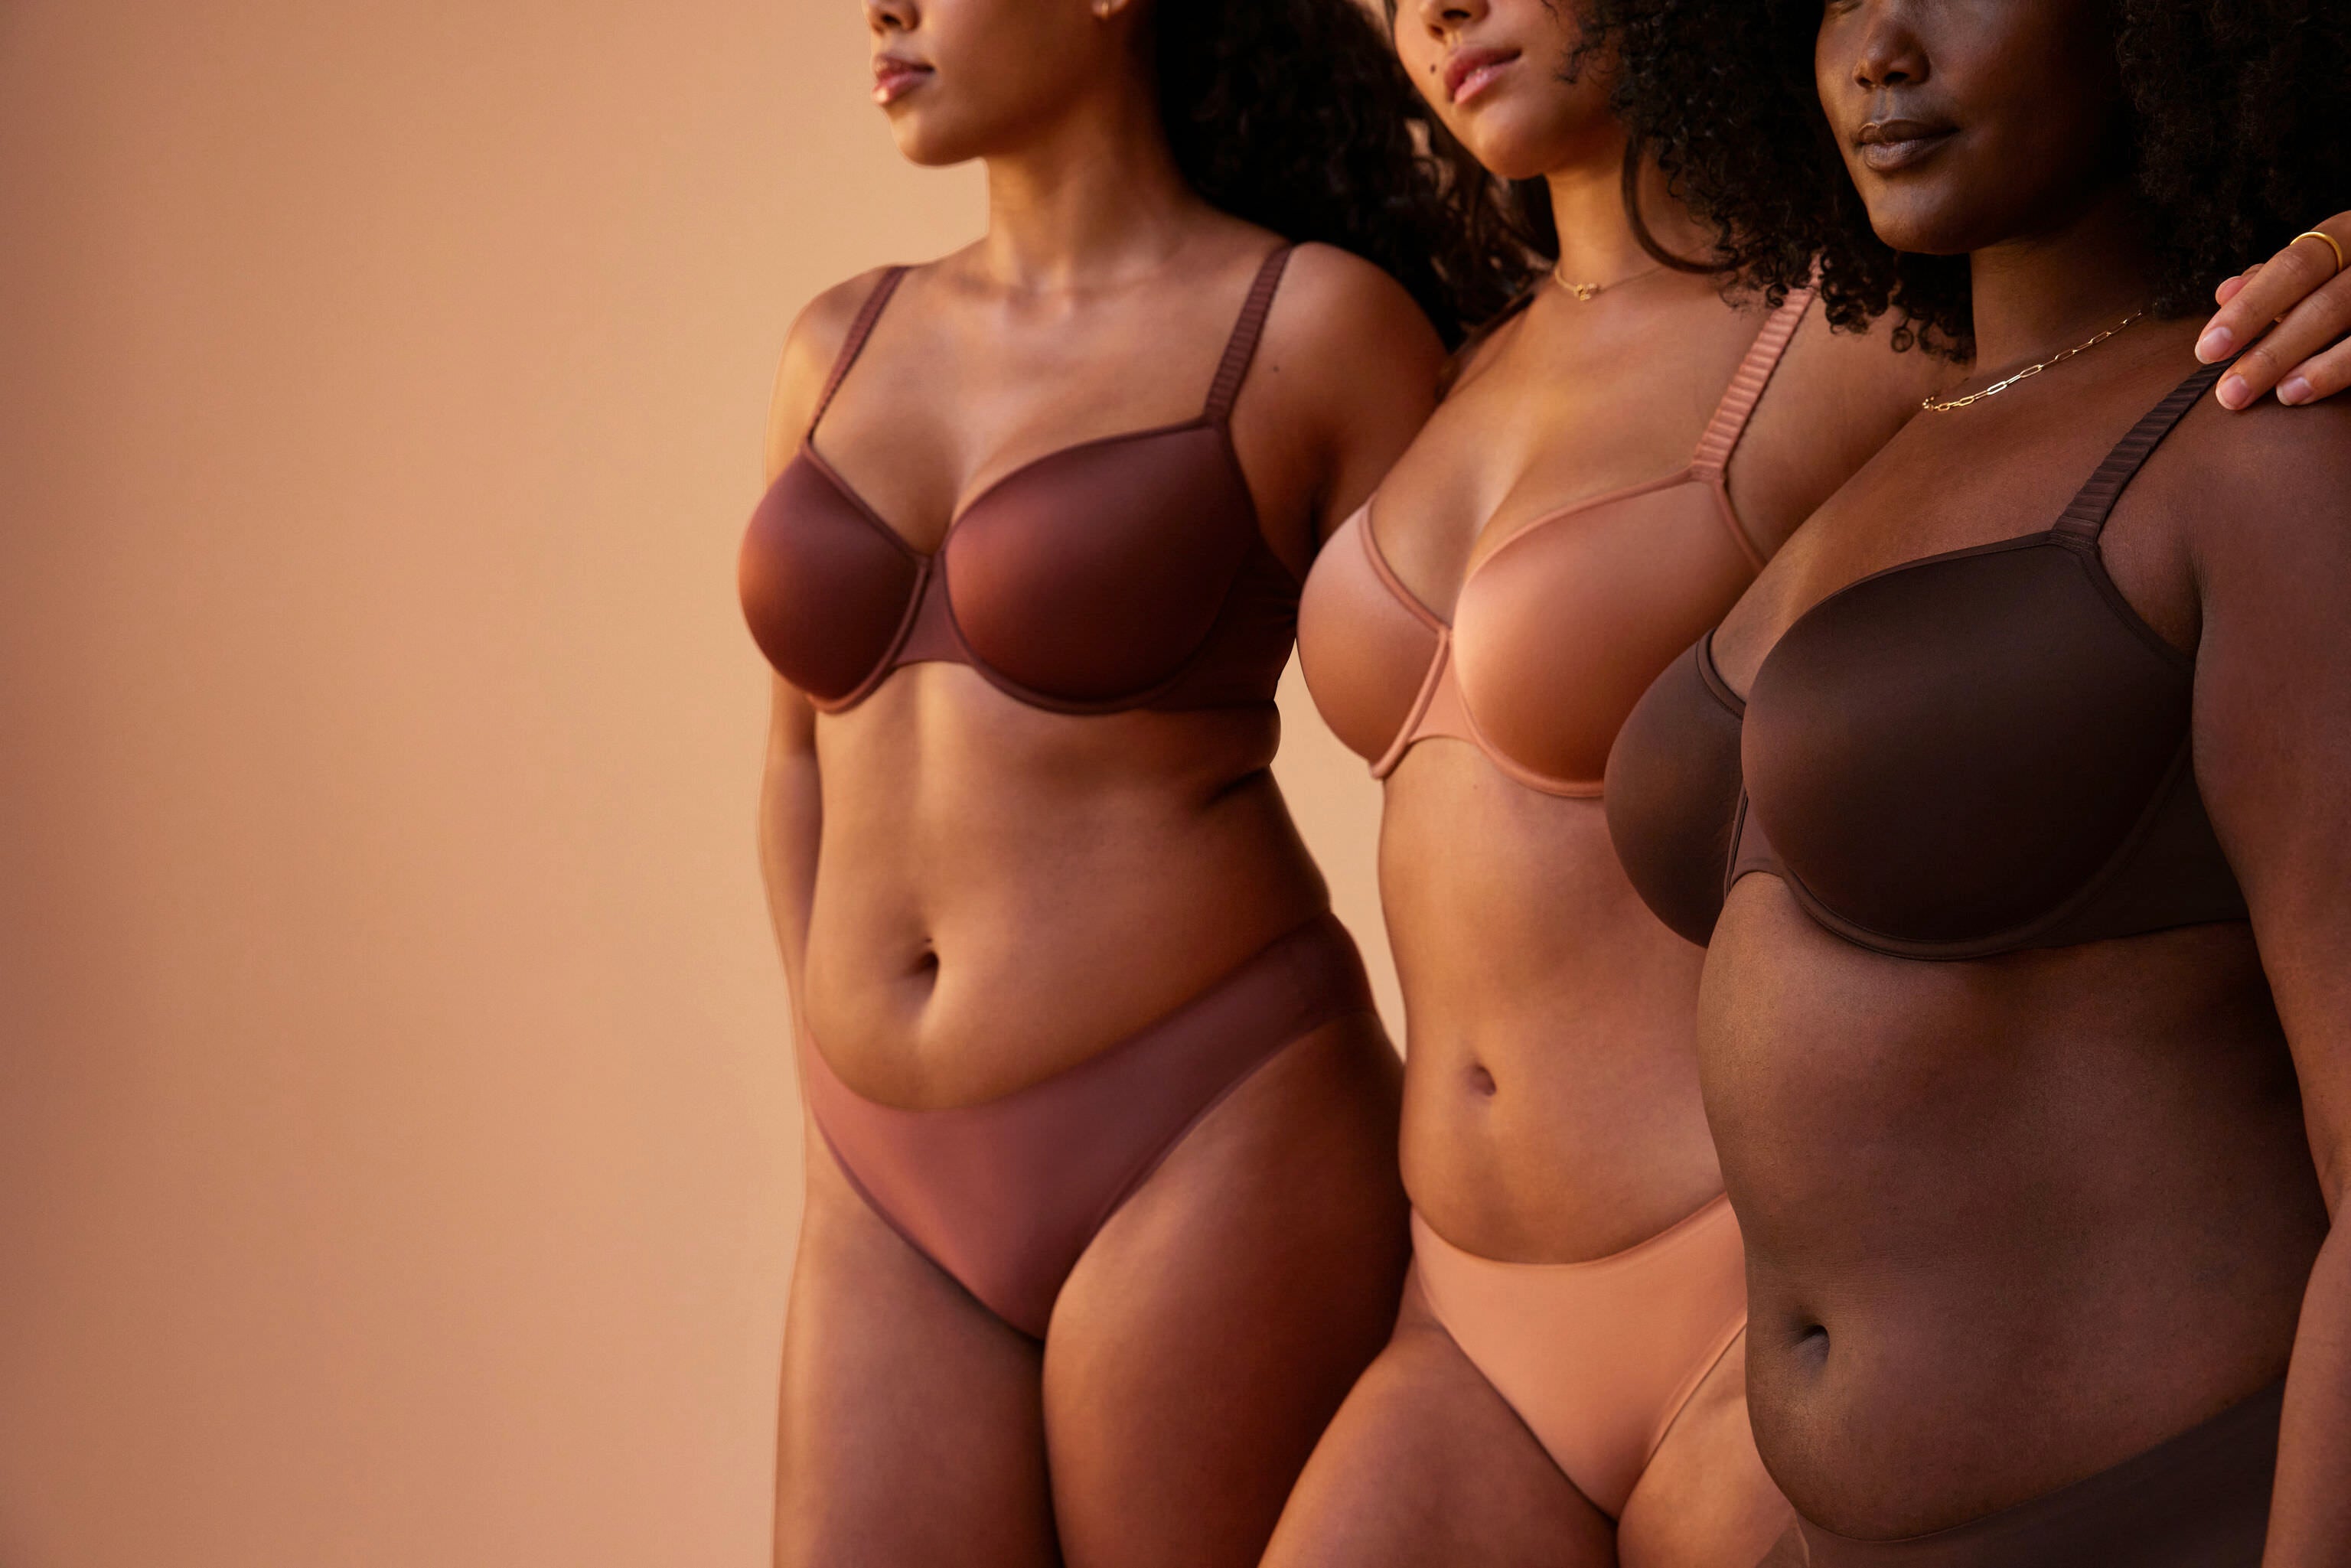 Three models wearing bras and underwear from ThirdLove against a brown background.